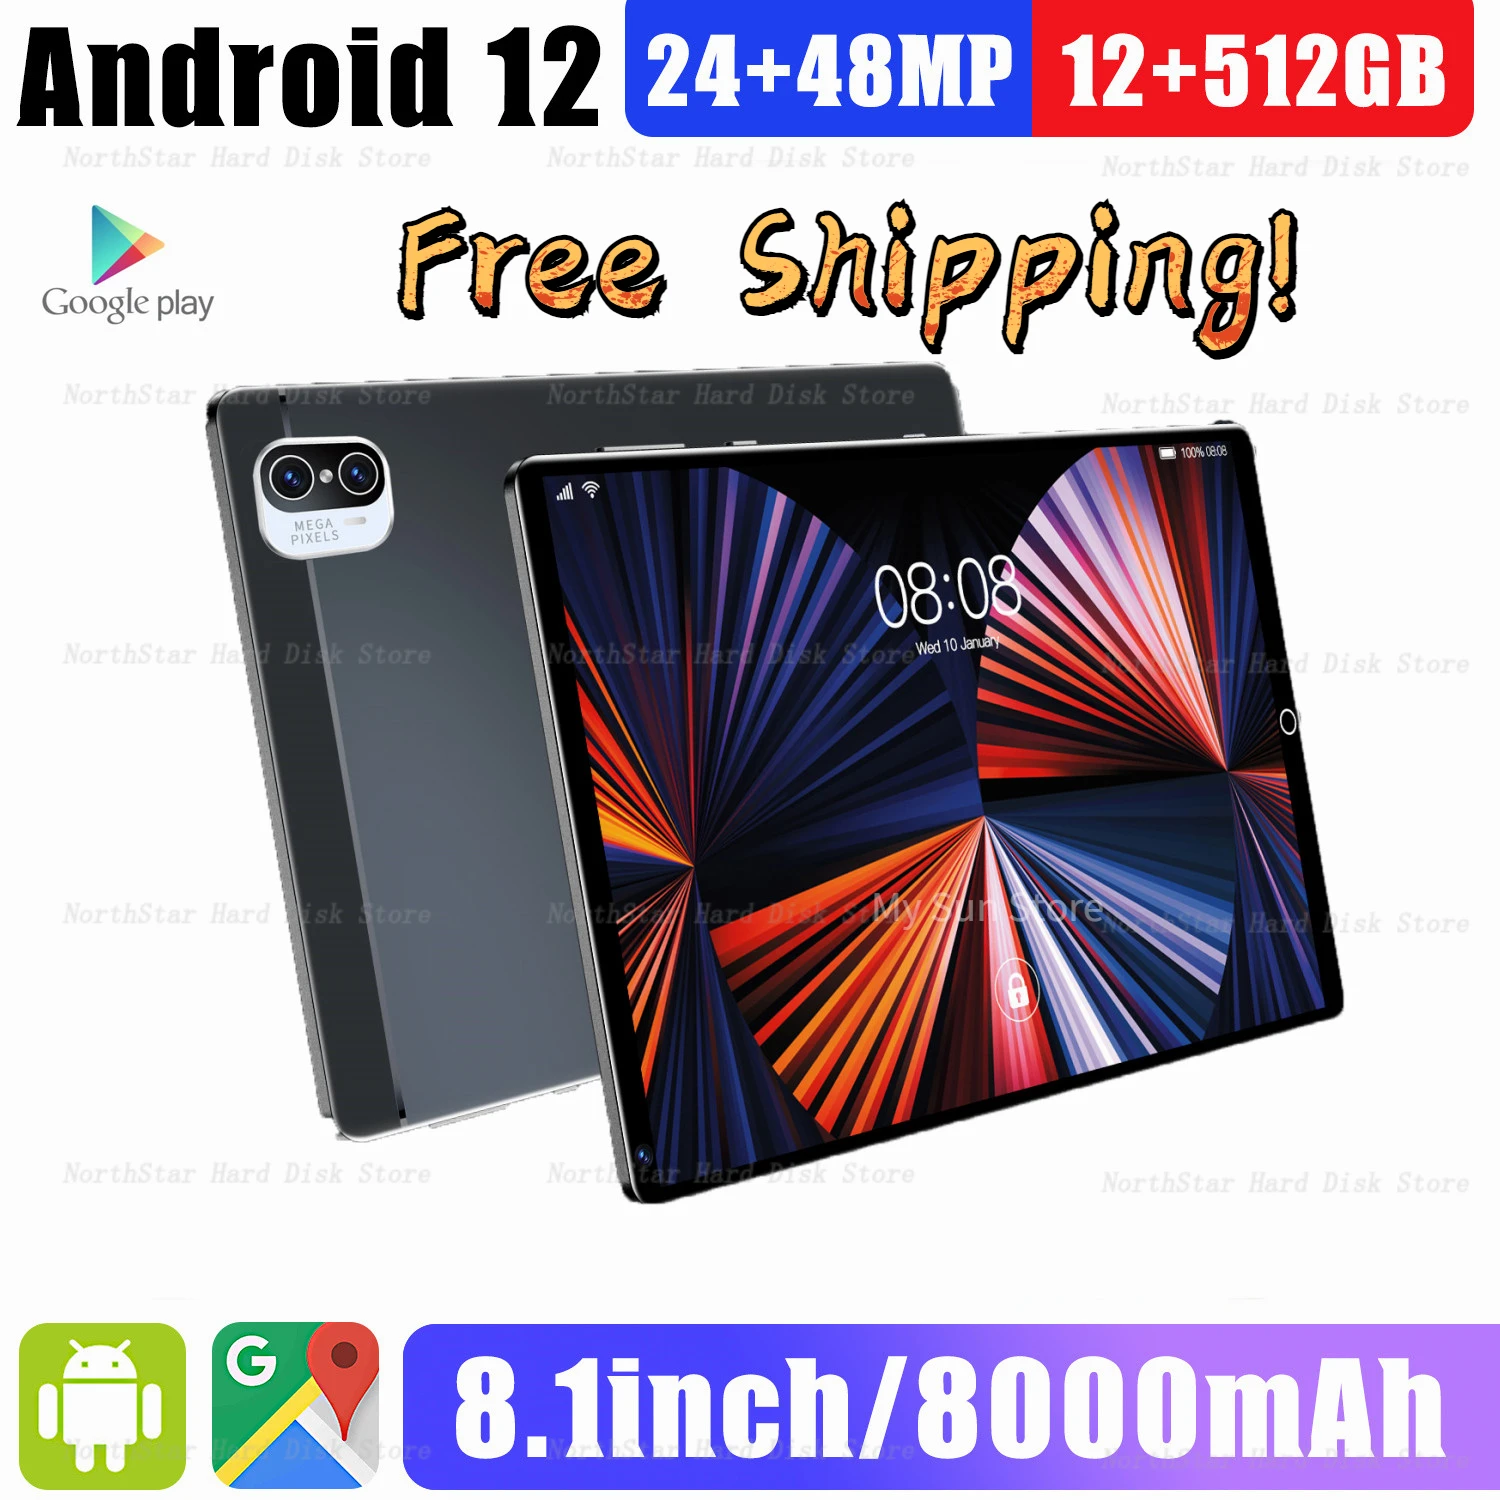 

Free Shipping X5 Cheap Tablet Pc 8 Inch Android 12 10 Core 12GB RAM 512GB ROM Dual 4G LTE Phone Call GPS Bluetooth WiFi Google T